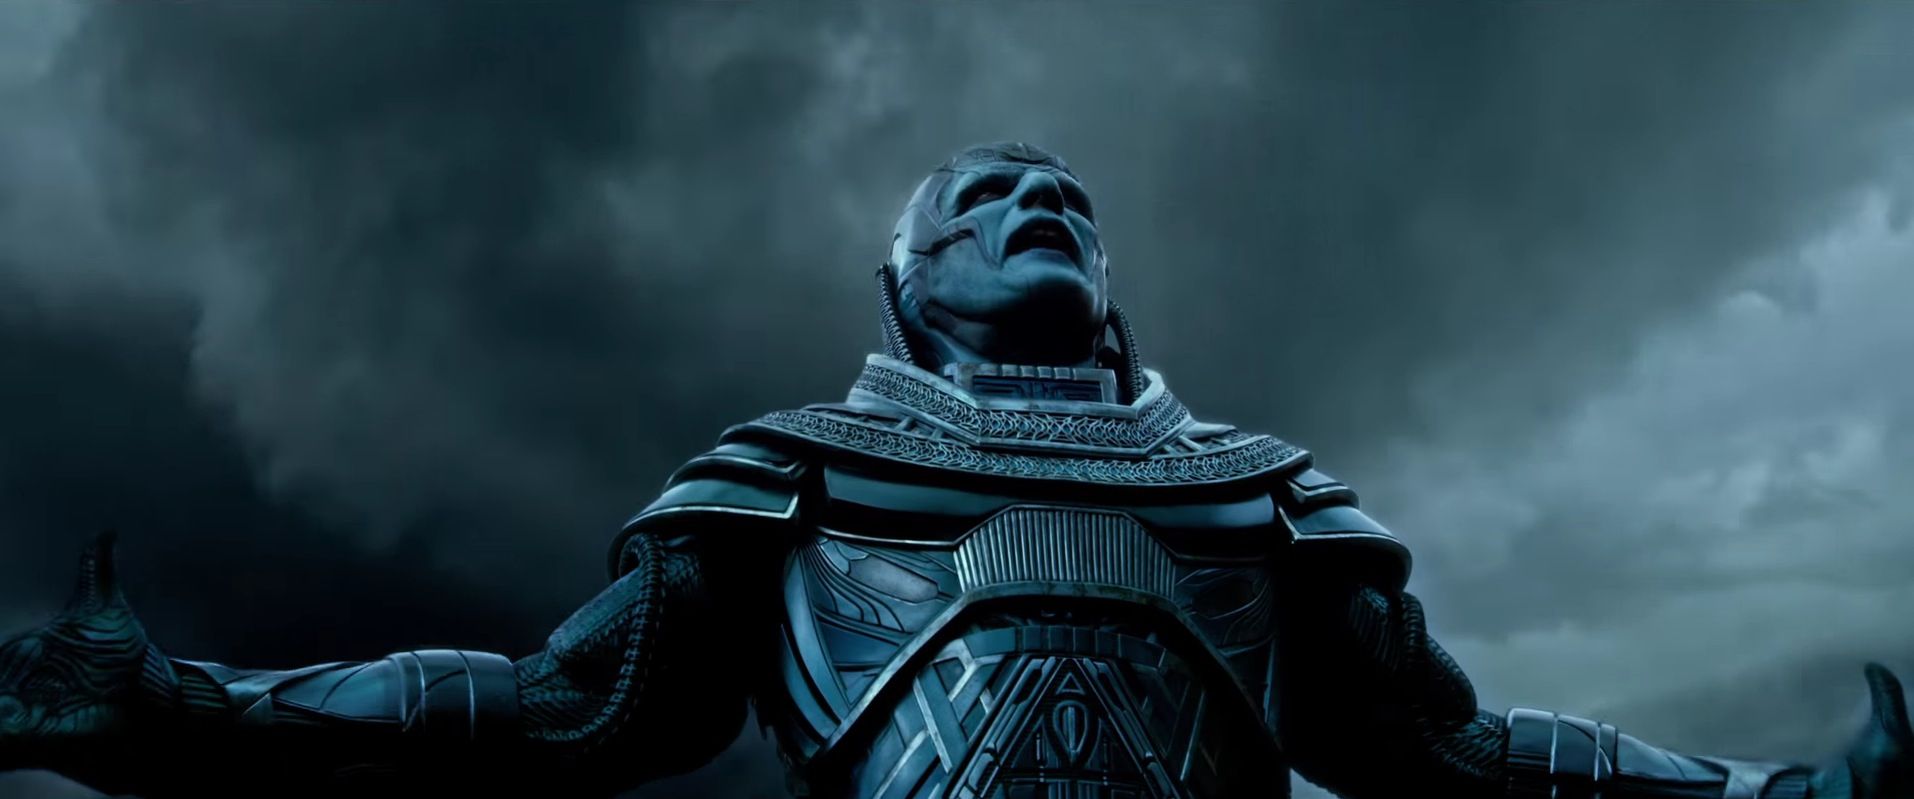 9 things we learned from the X-Men: Apocalypse trailer